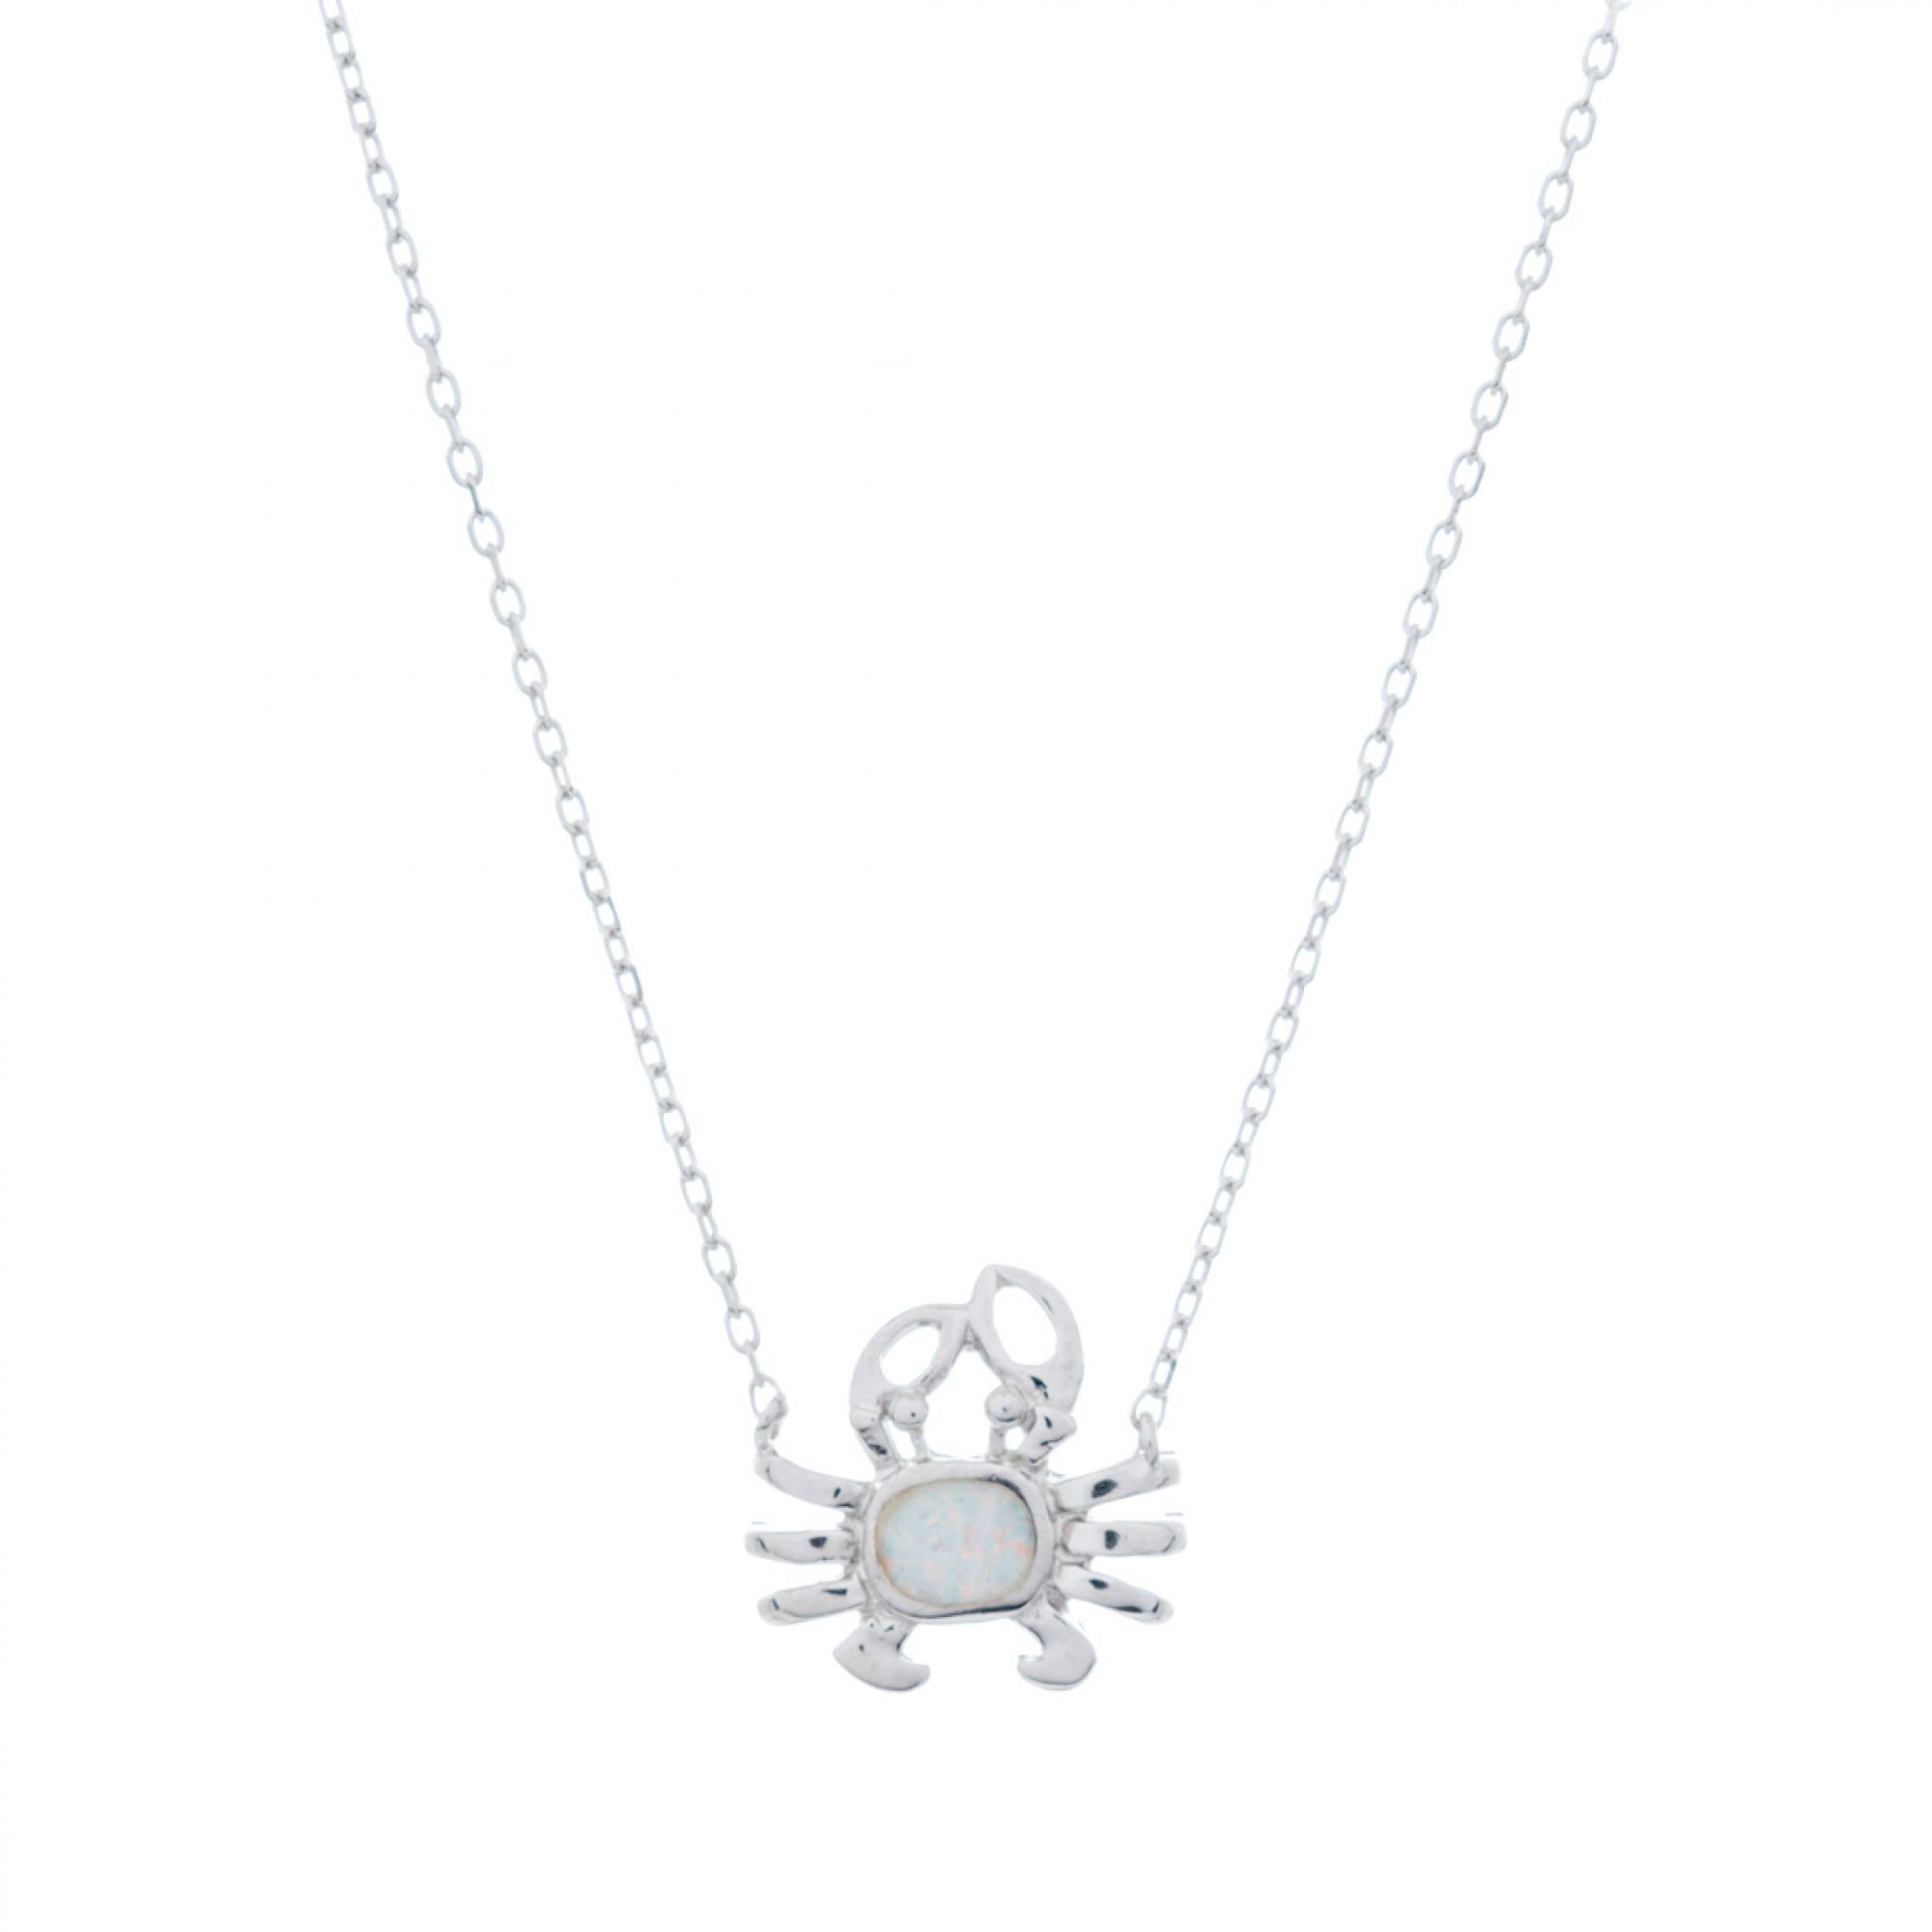 White opal crab necklace